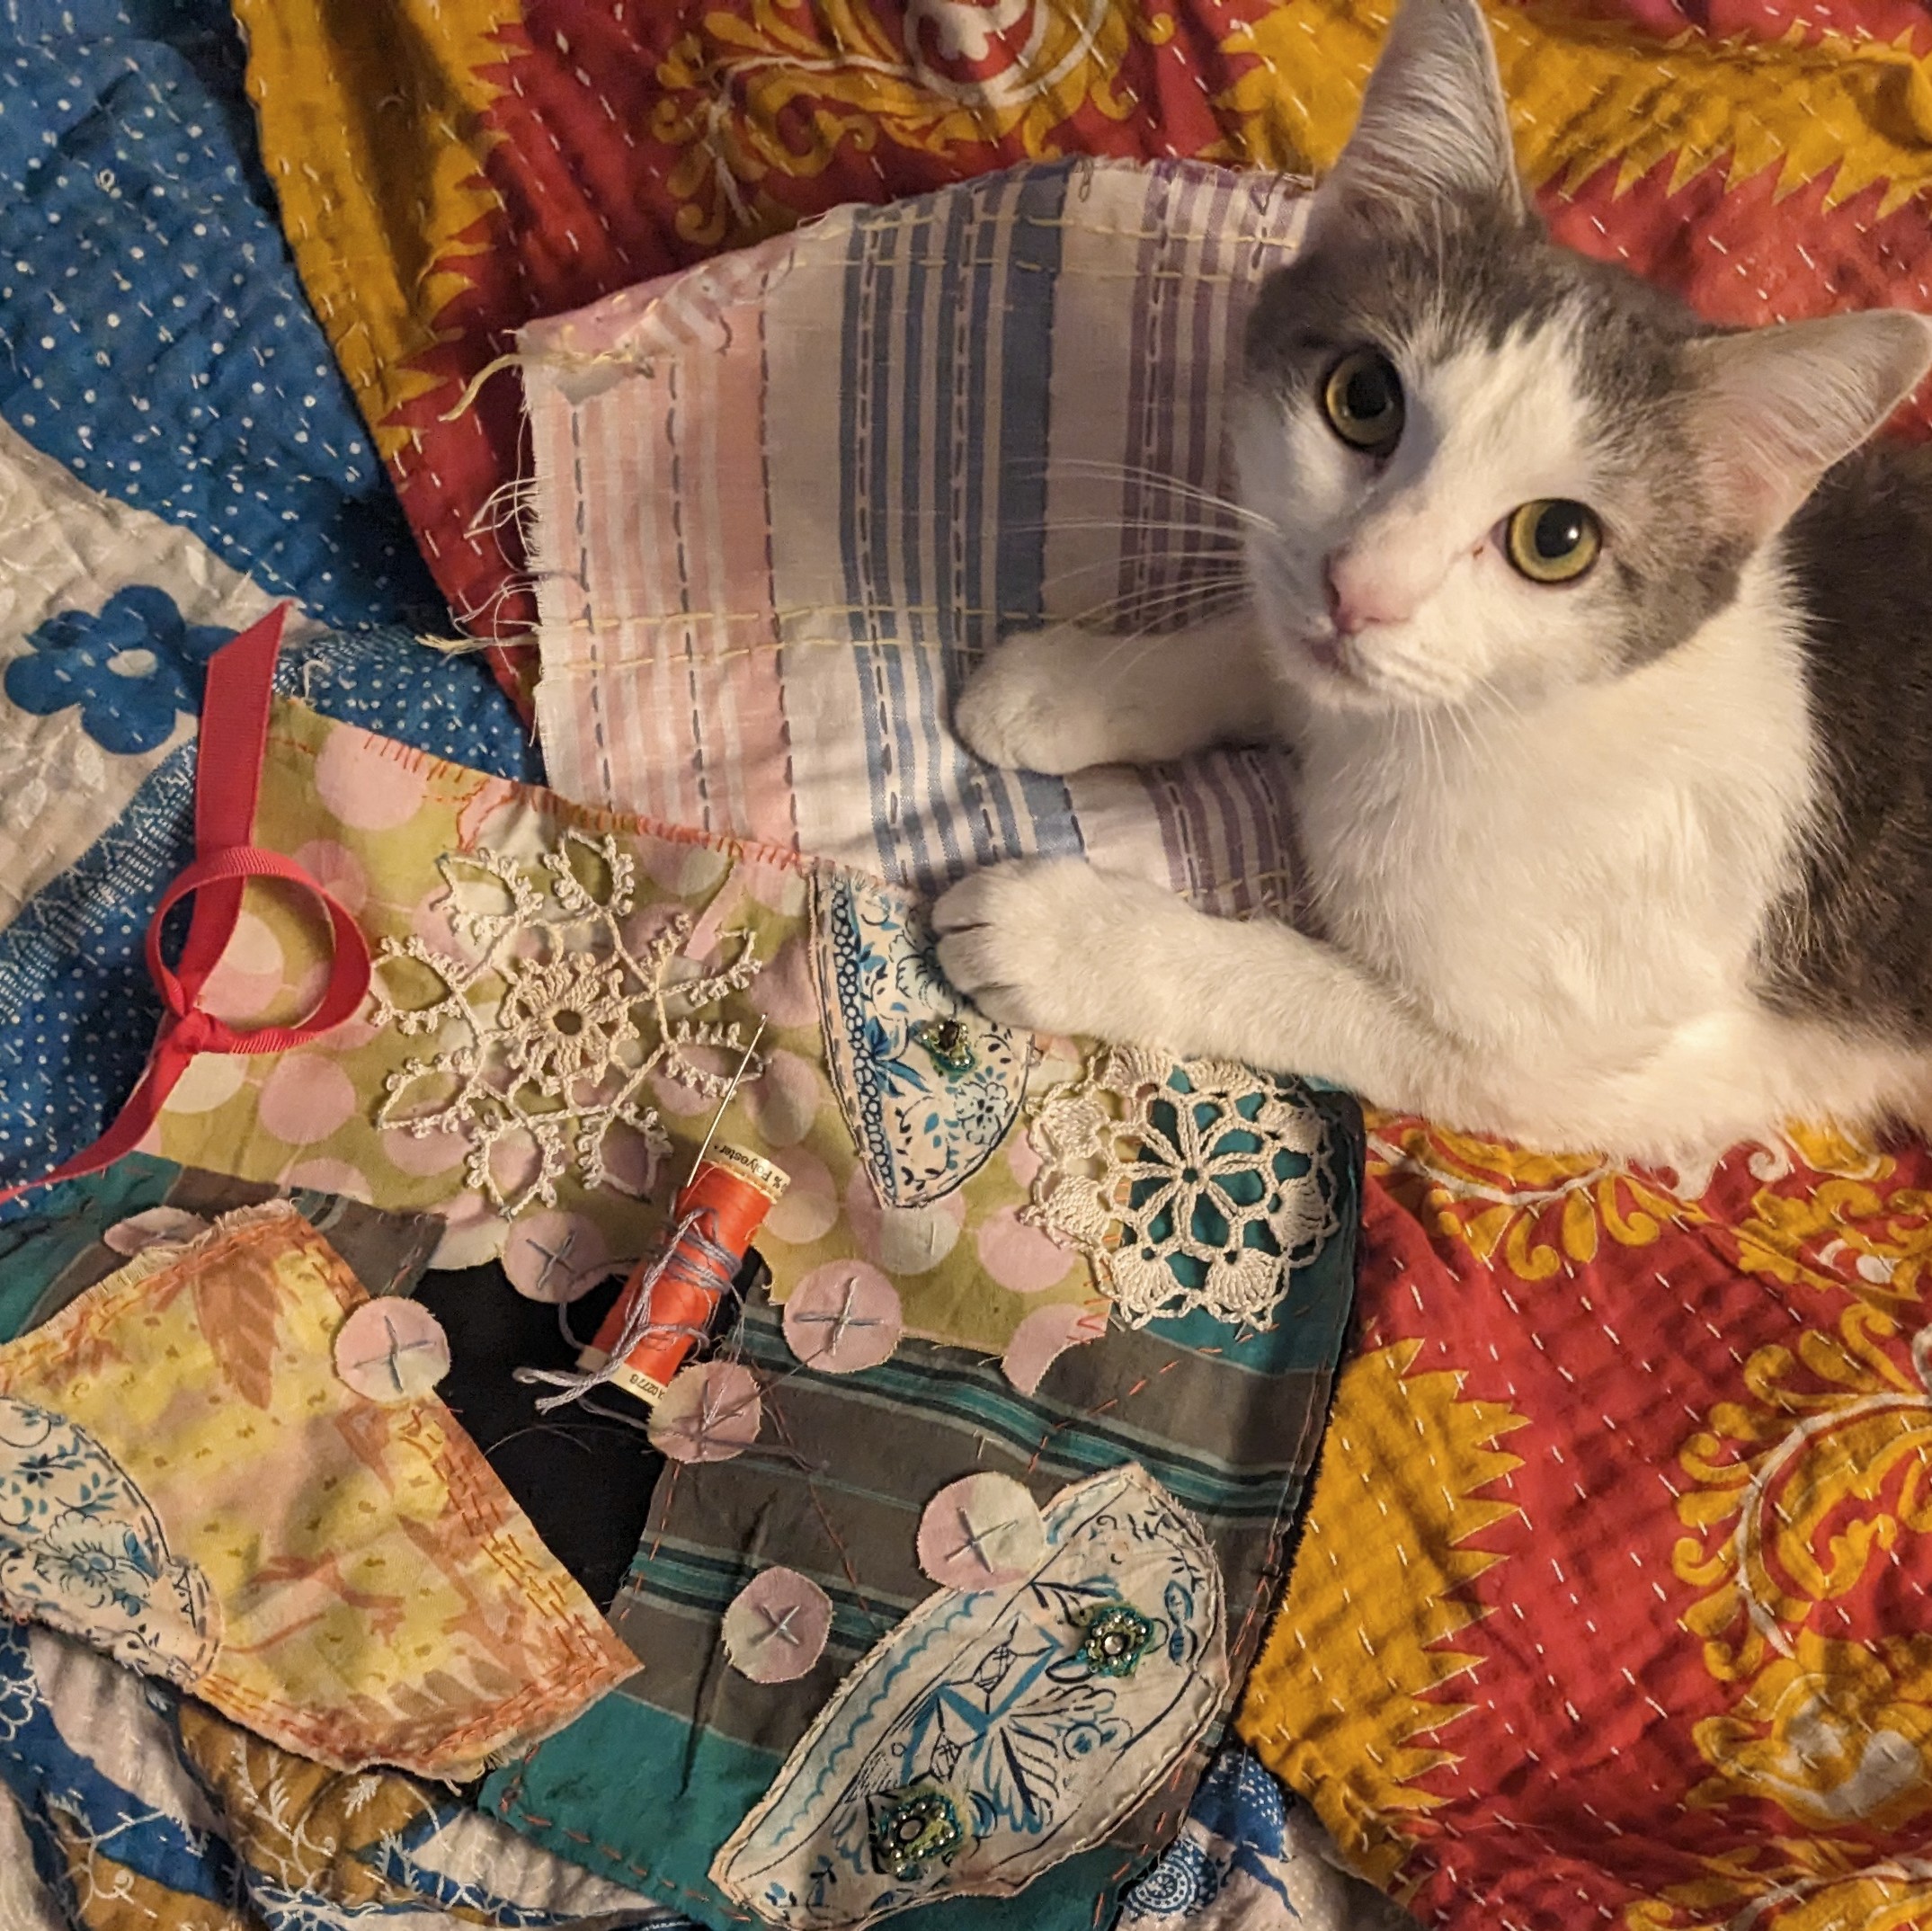 A kantha blanket with hand stitched samplers and needle and thread on top take up the frame. A kitten is laying on the blanket and samplers looking up at the viewer. 